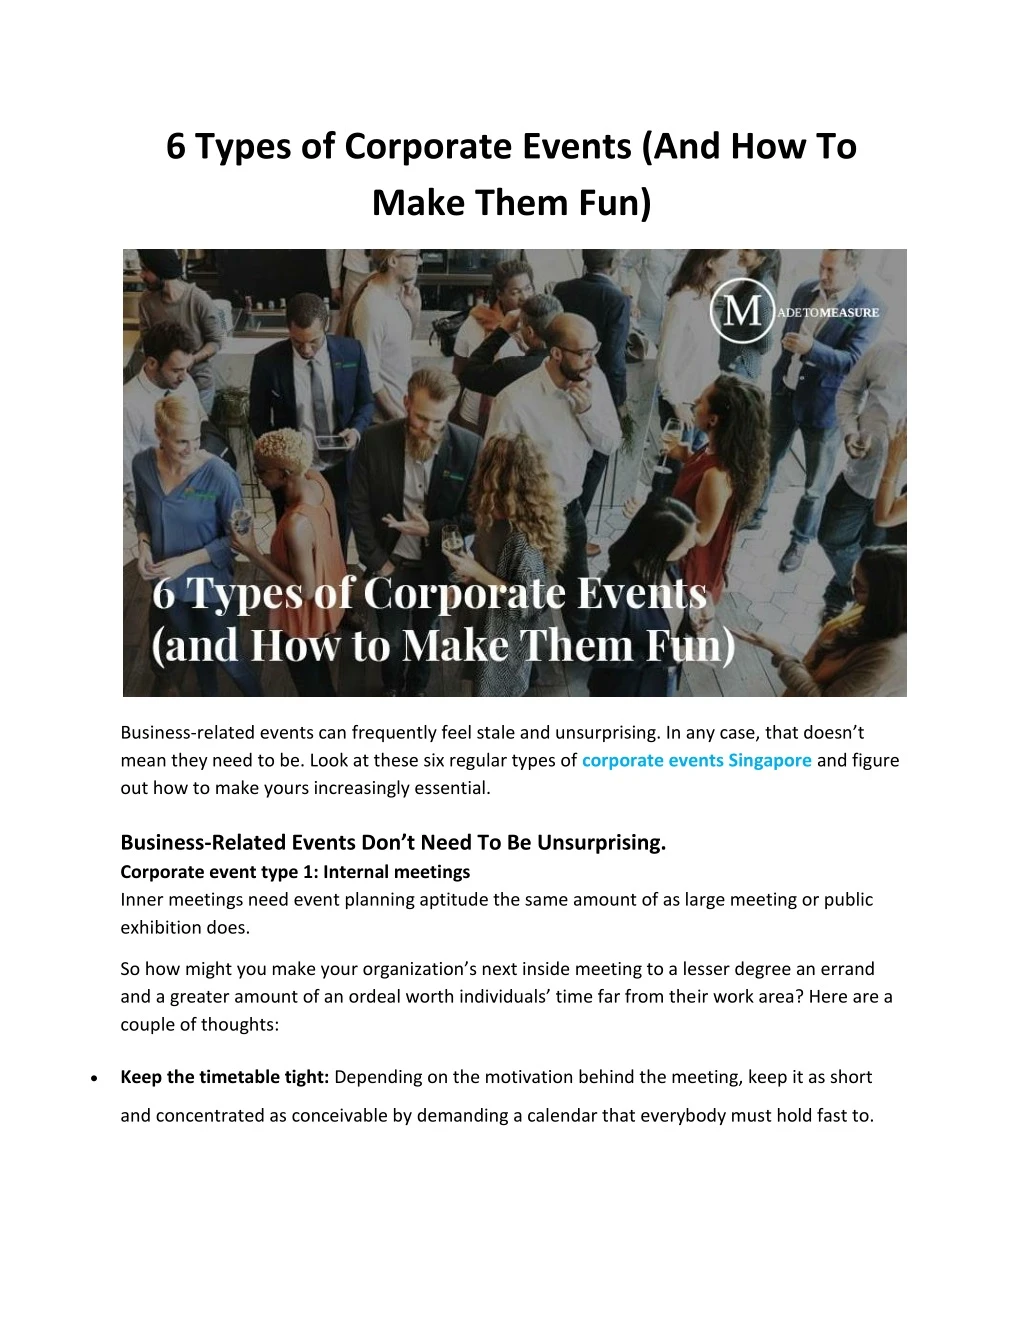 6 types of corporate events and how to make them